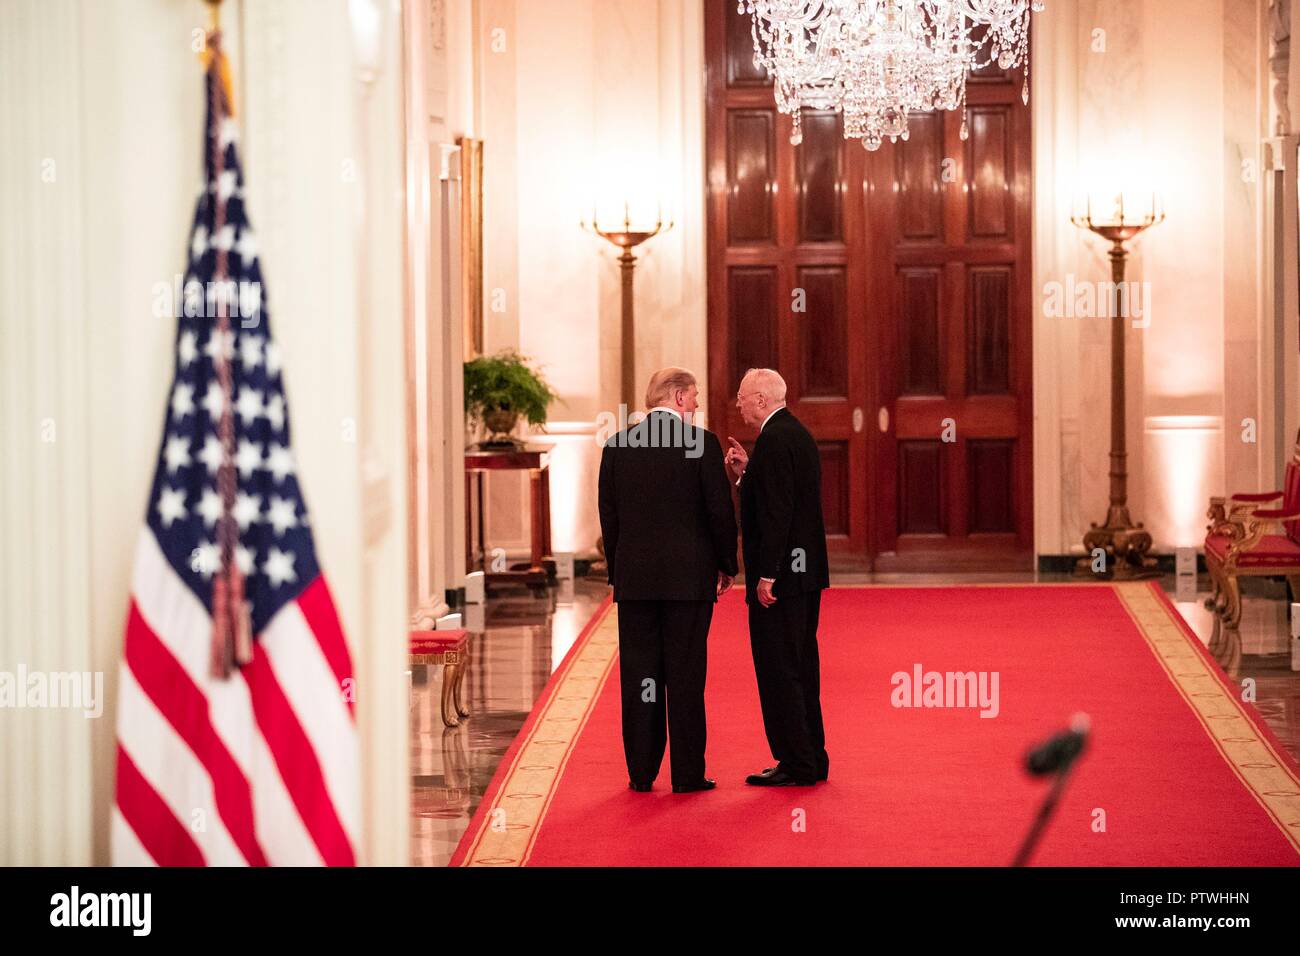 U.S President Donald Trump speaks with Anthony Kennedy, right, retired Associate Justice of the Supreme Court, following the swearing-in of Judge Brett Kavanaugh to be the Supreme Court 114th justice at the White House October 8, 2018 Washington, DC. Stock Photo